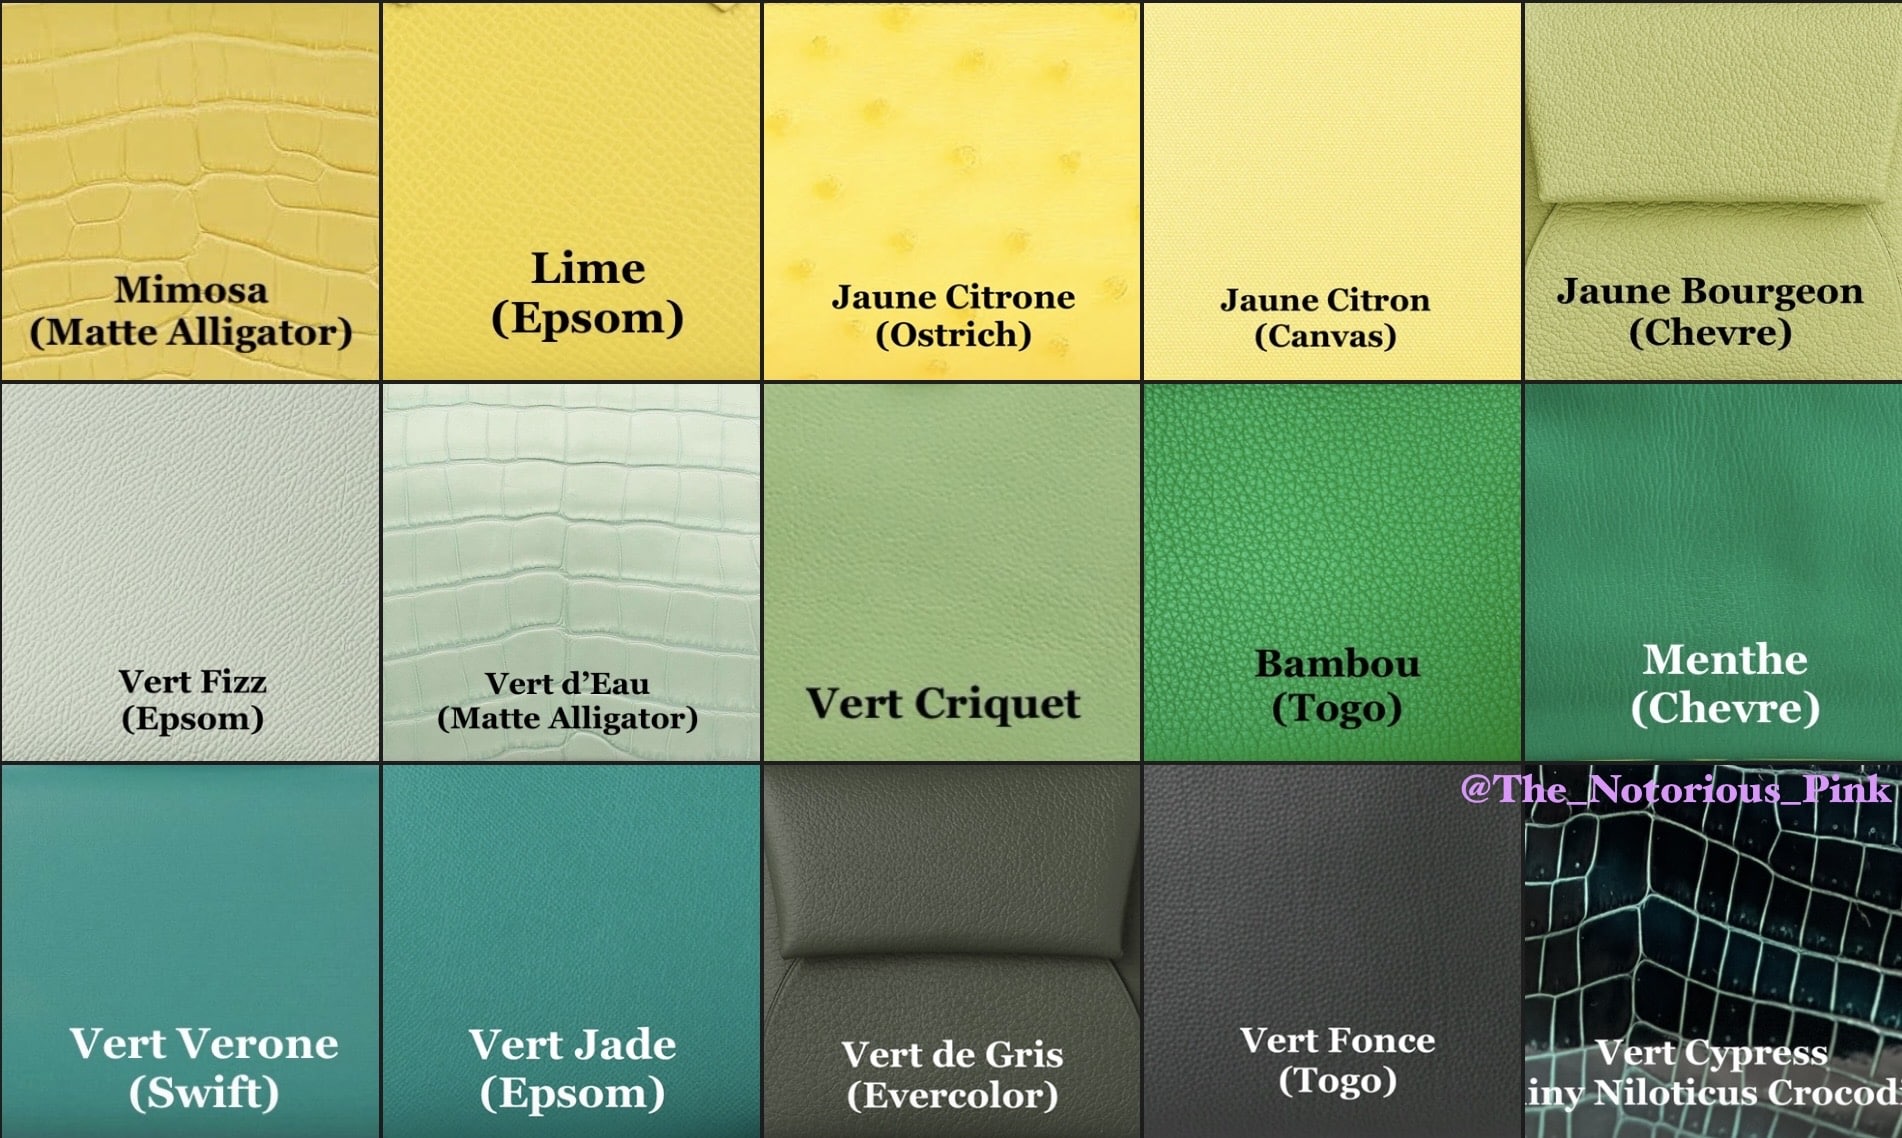 The Yellow and Green range of leather colors being offered by Hermès for Autumn-Winter 2022. Via @The_Notorious_Pink.